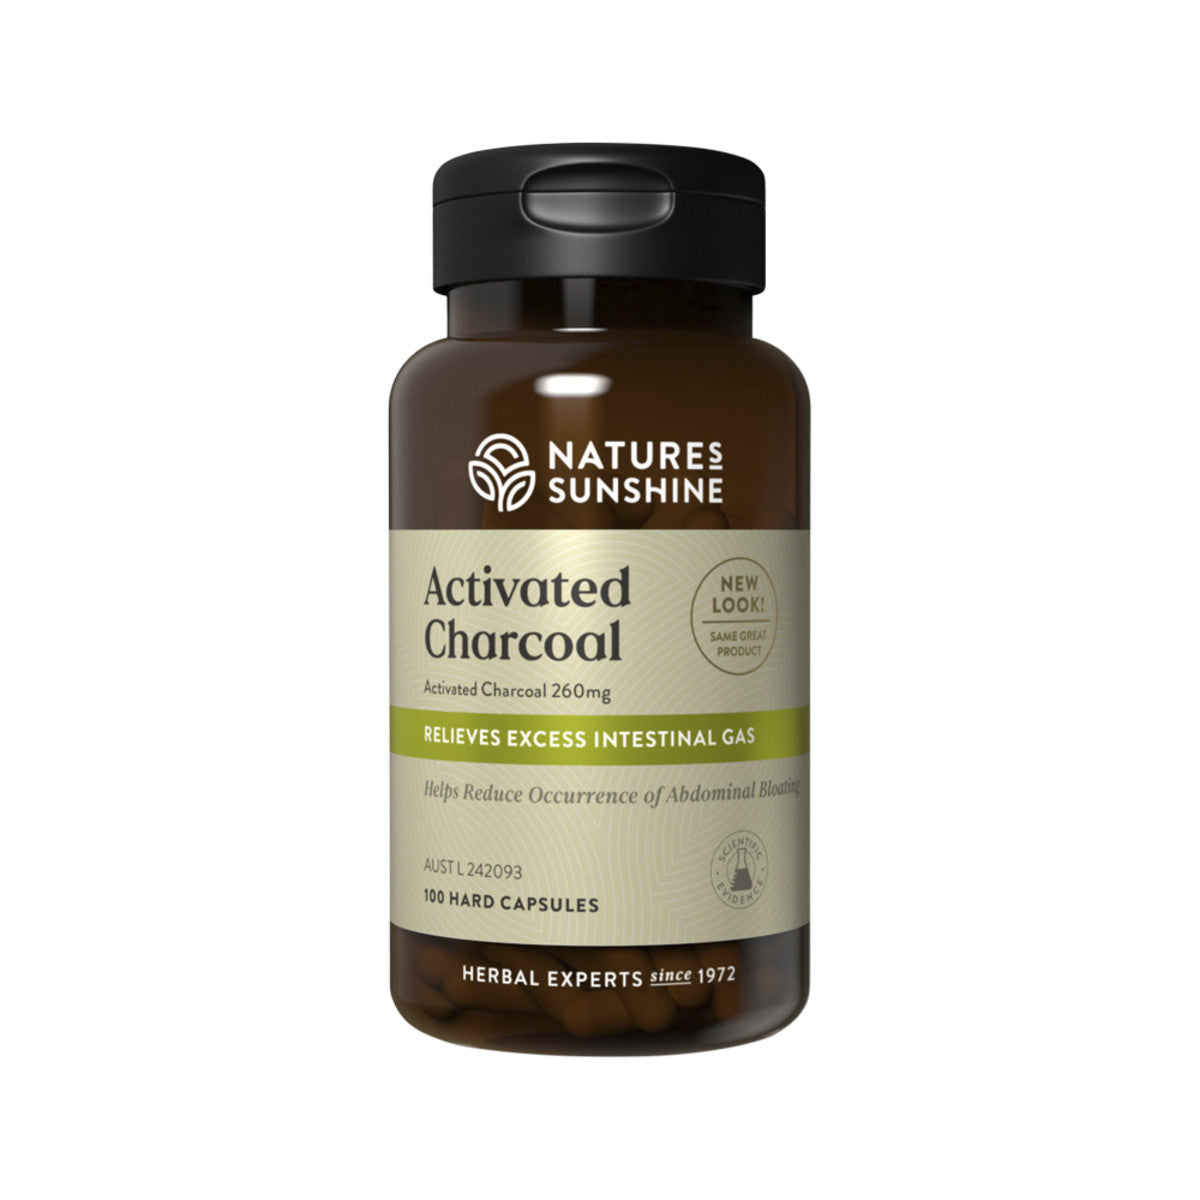 Nature's Sunshine - Activated Charcoal 260mg